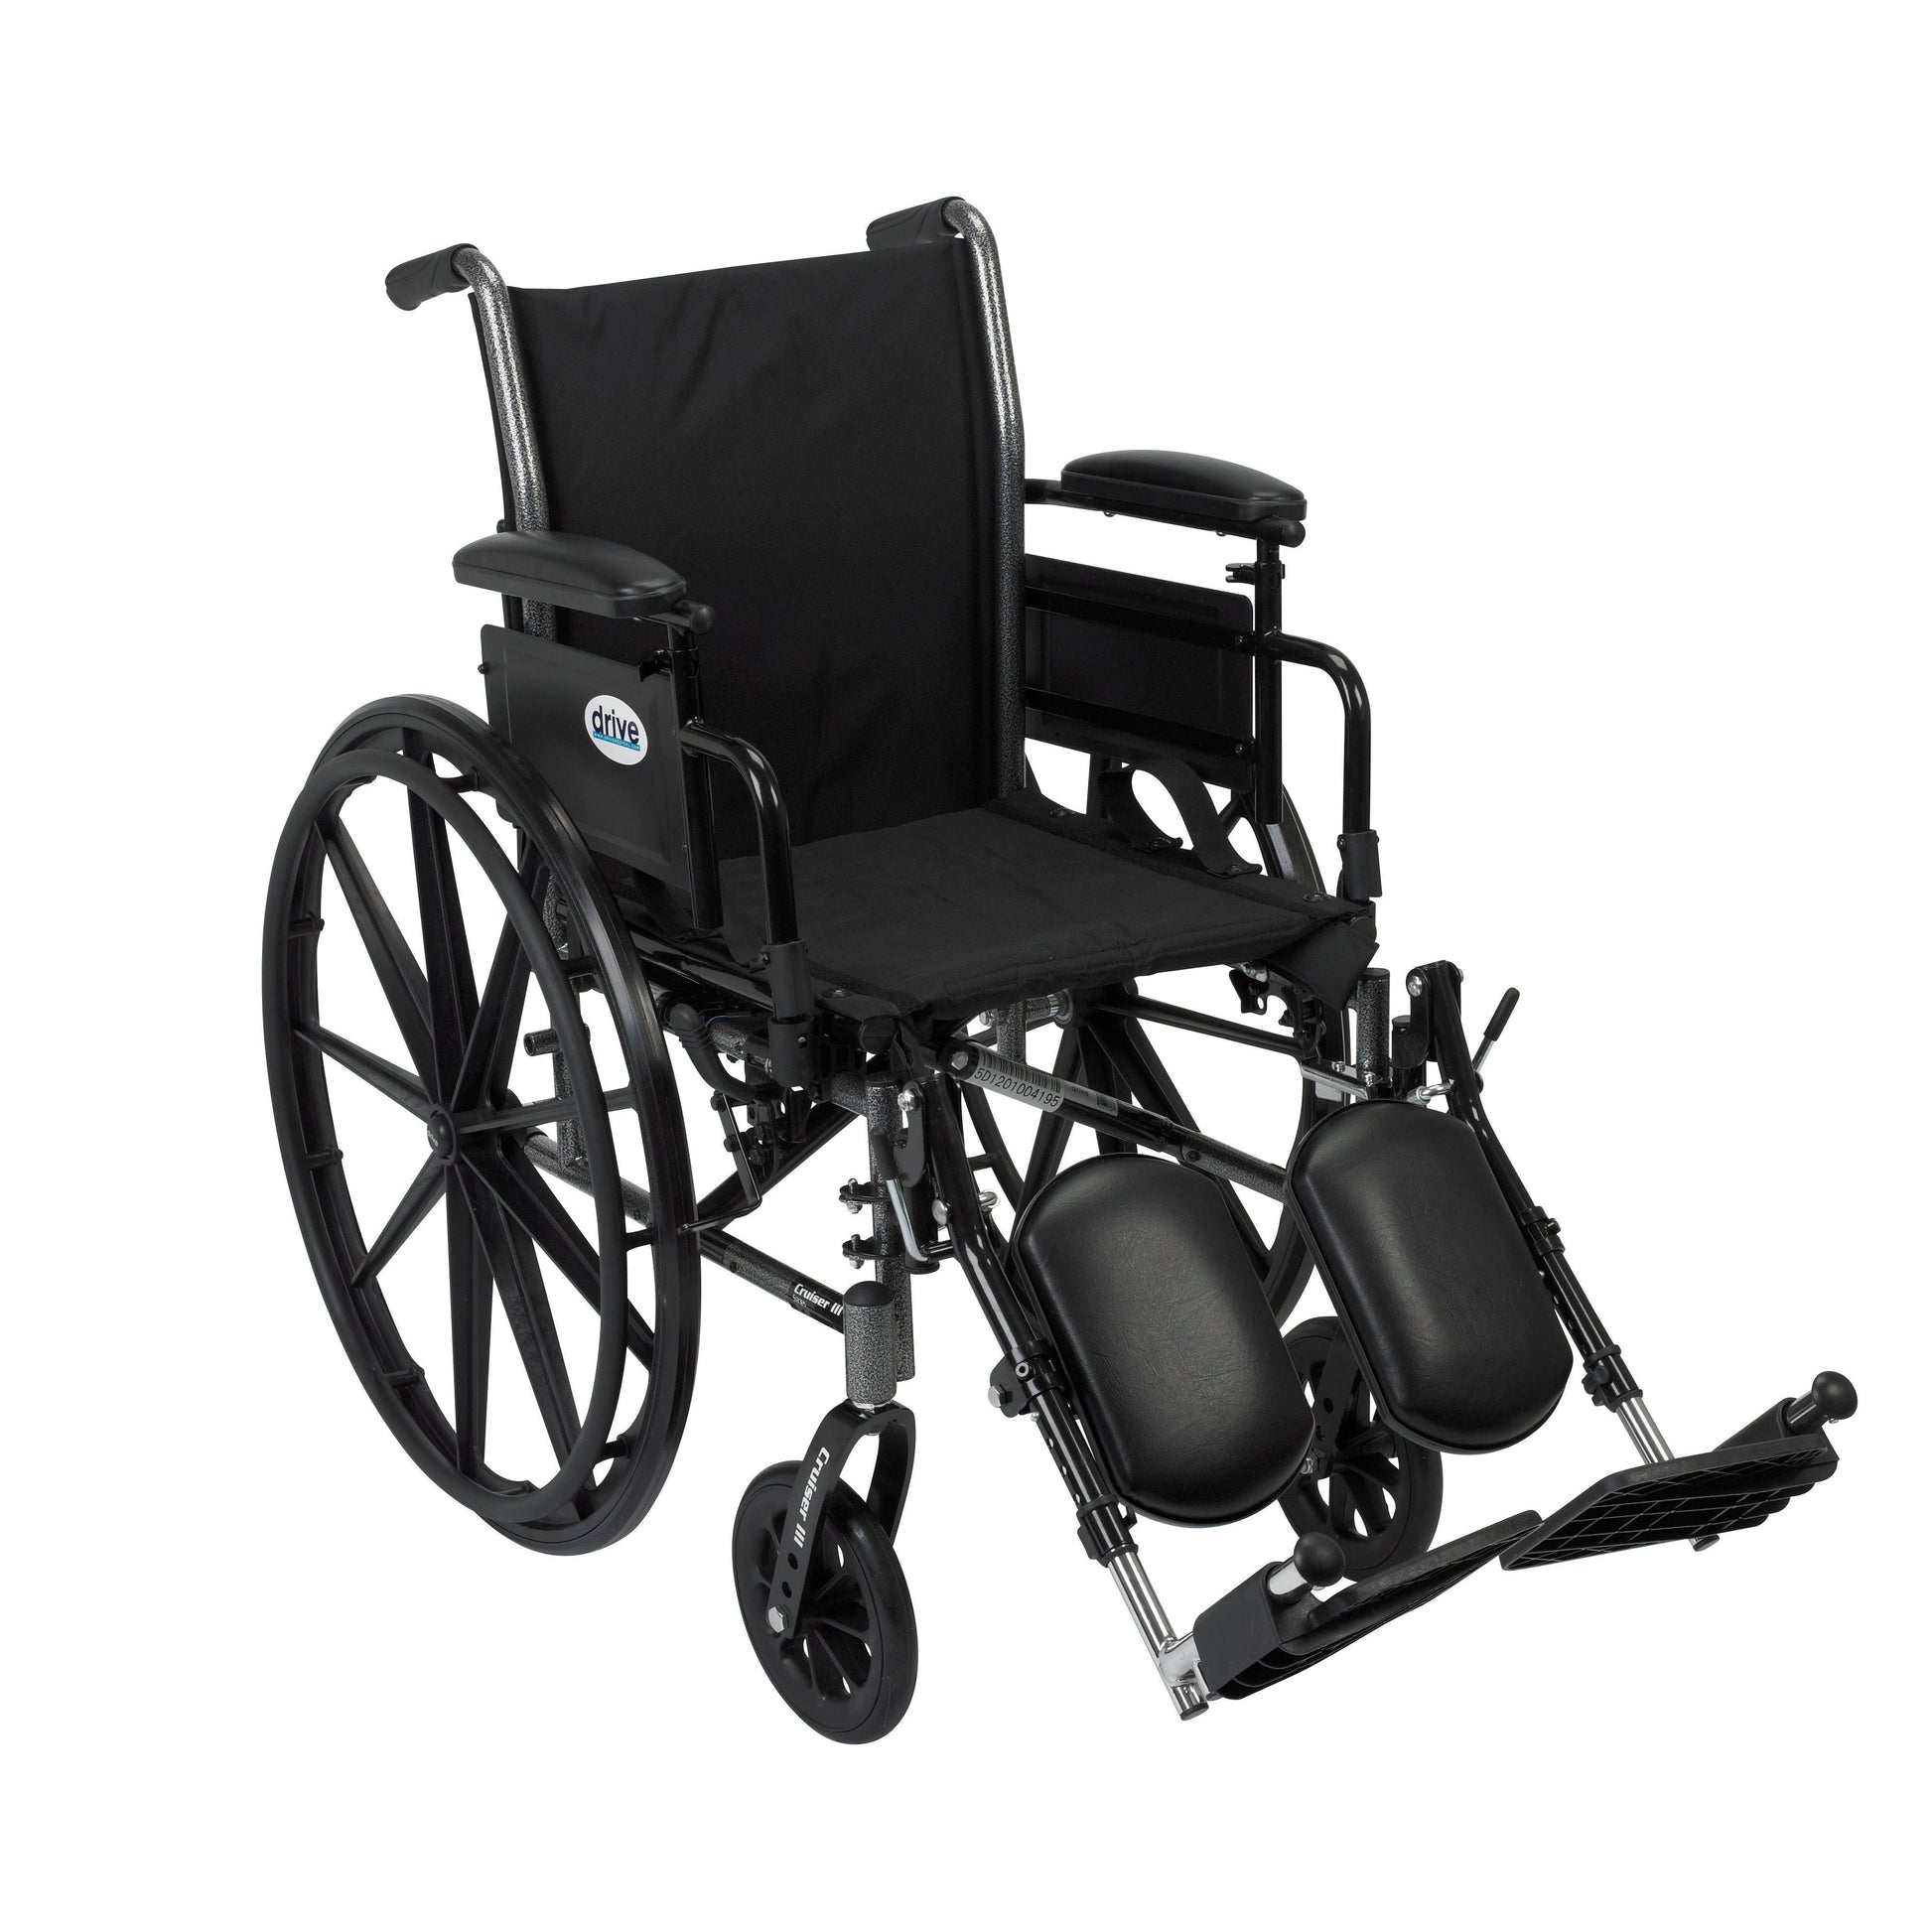 Cruiser III Light Weight Wheelchair with Flip Back Removable Arms, Adjustable Height Desk Arms, Elevating Leg Rests, 20"